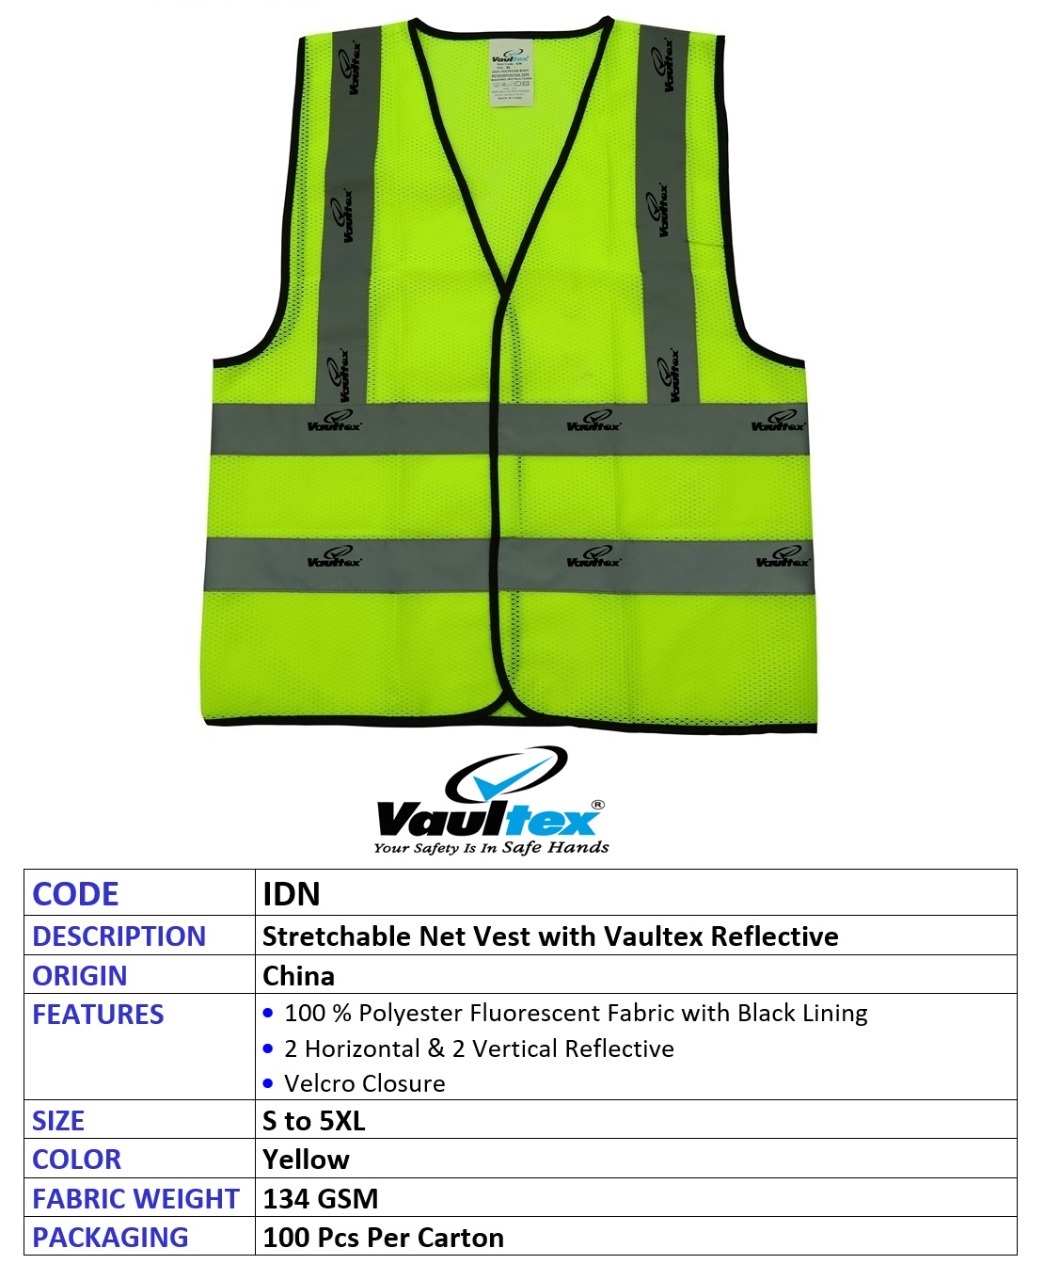 VAULTEX STRETCHABLE NET VEST WITH REFLECTIVE IDN